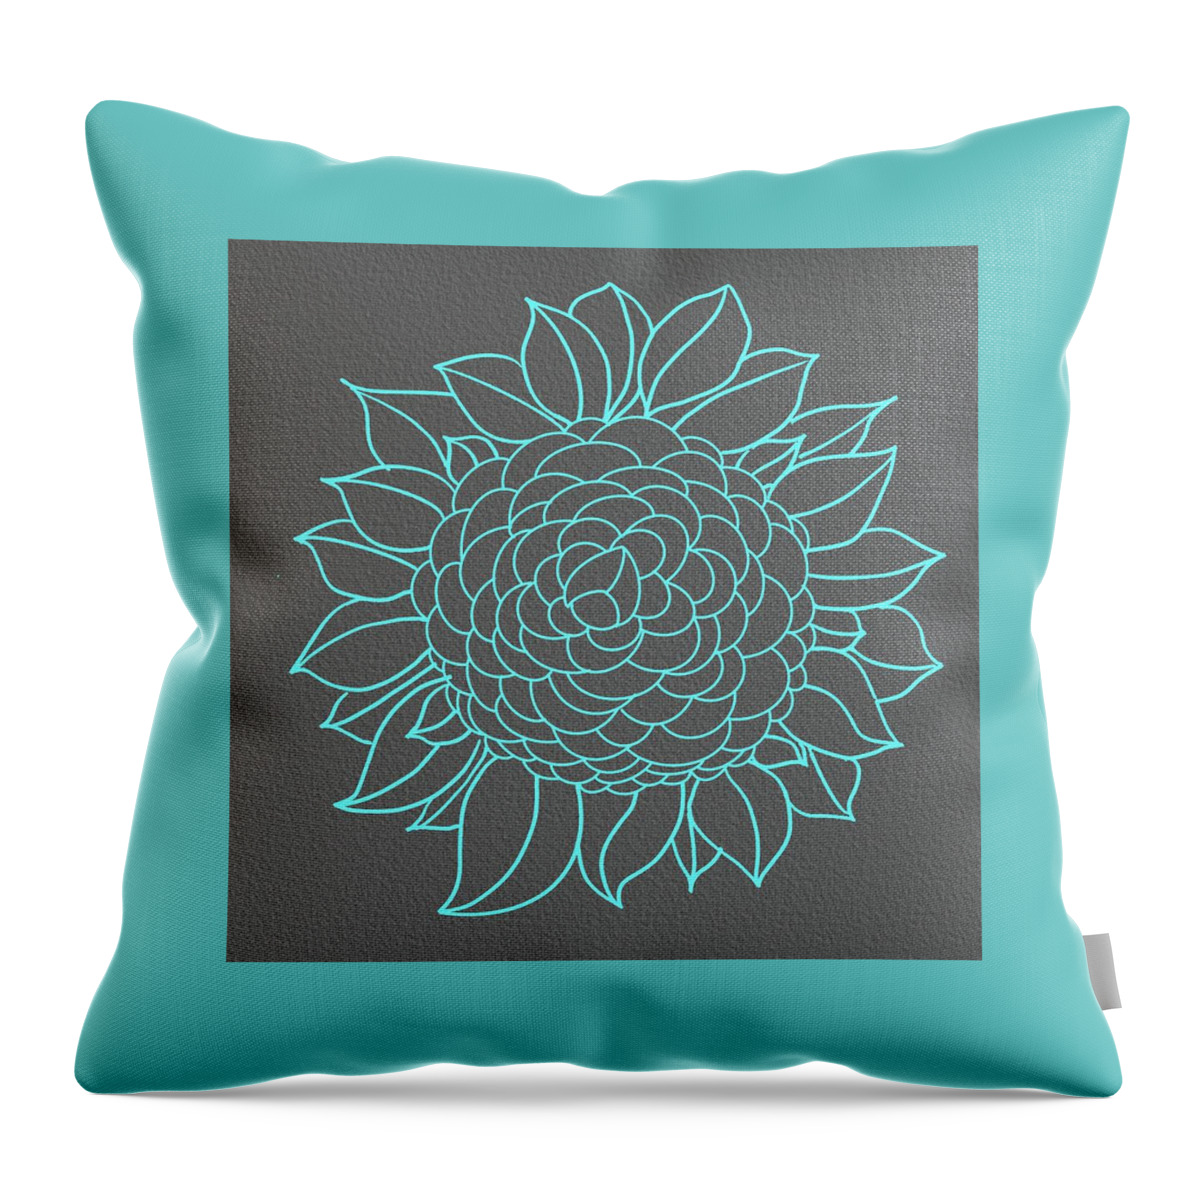 Camellia Throw Pillow featuring the digital art Tower Camellia by Steve Hayhurst